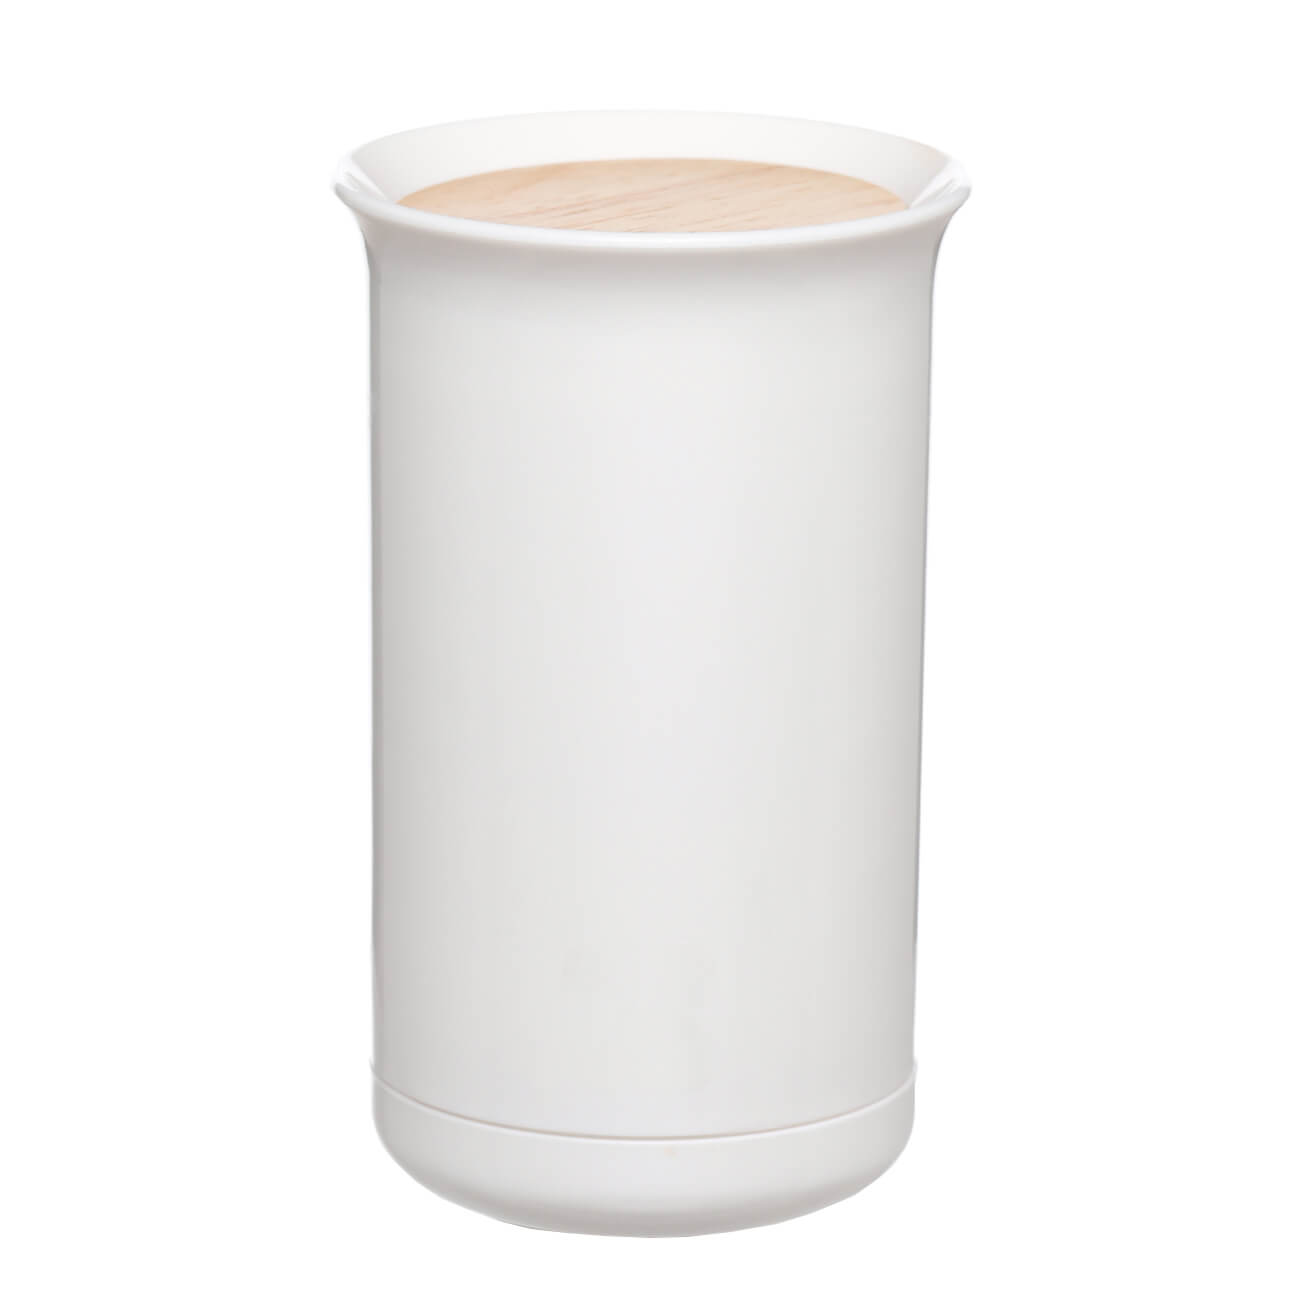 Toothpick container, 10 cm, plastic / rubber wood, White, White style изображение № 1